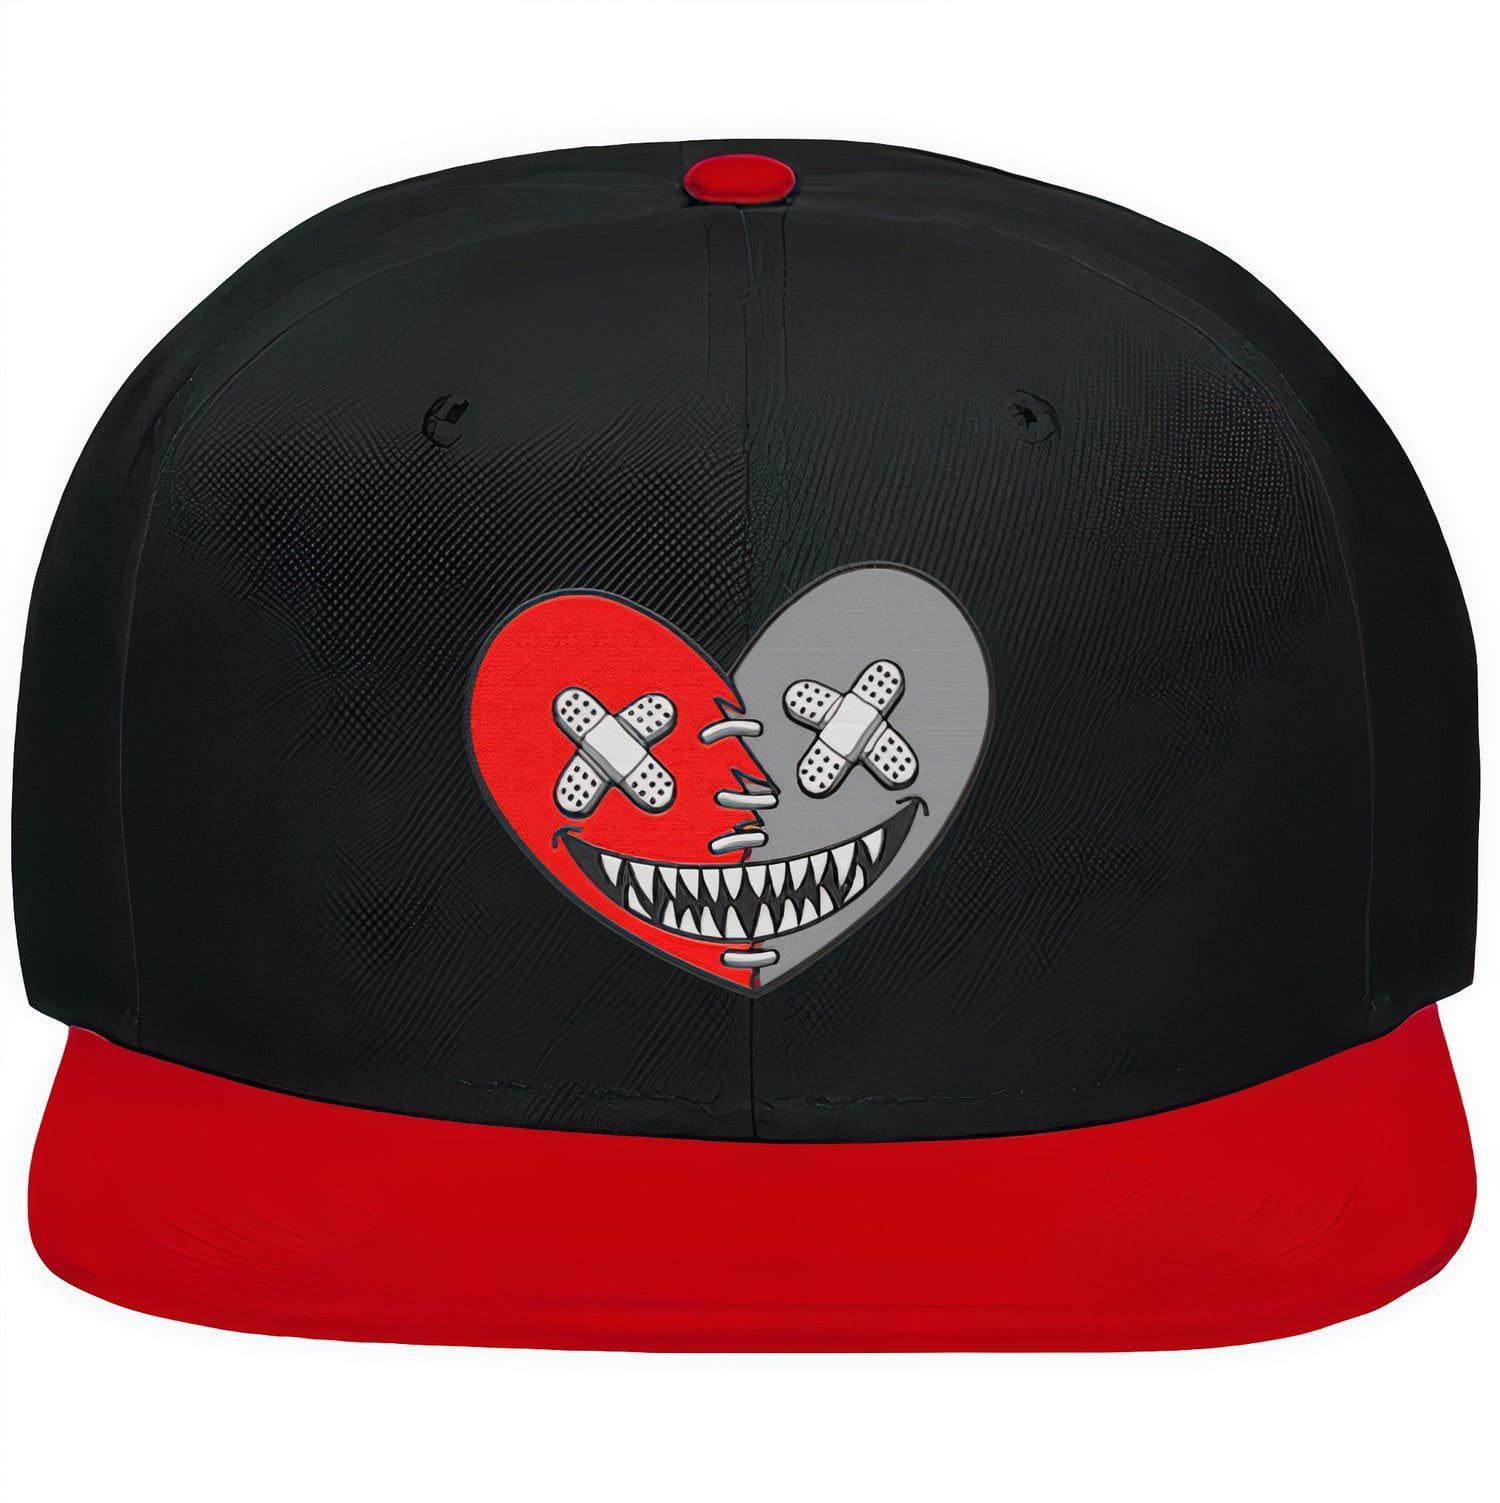 Red Taxi 12s Snapback Hat - Jordan 12 Red Taxis Hats - Heart